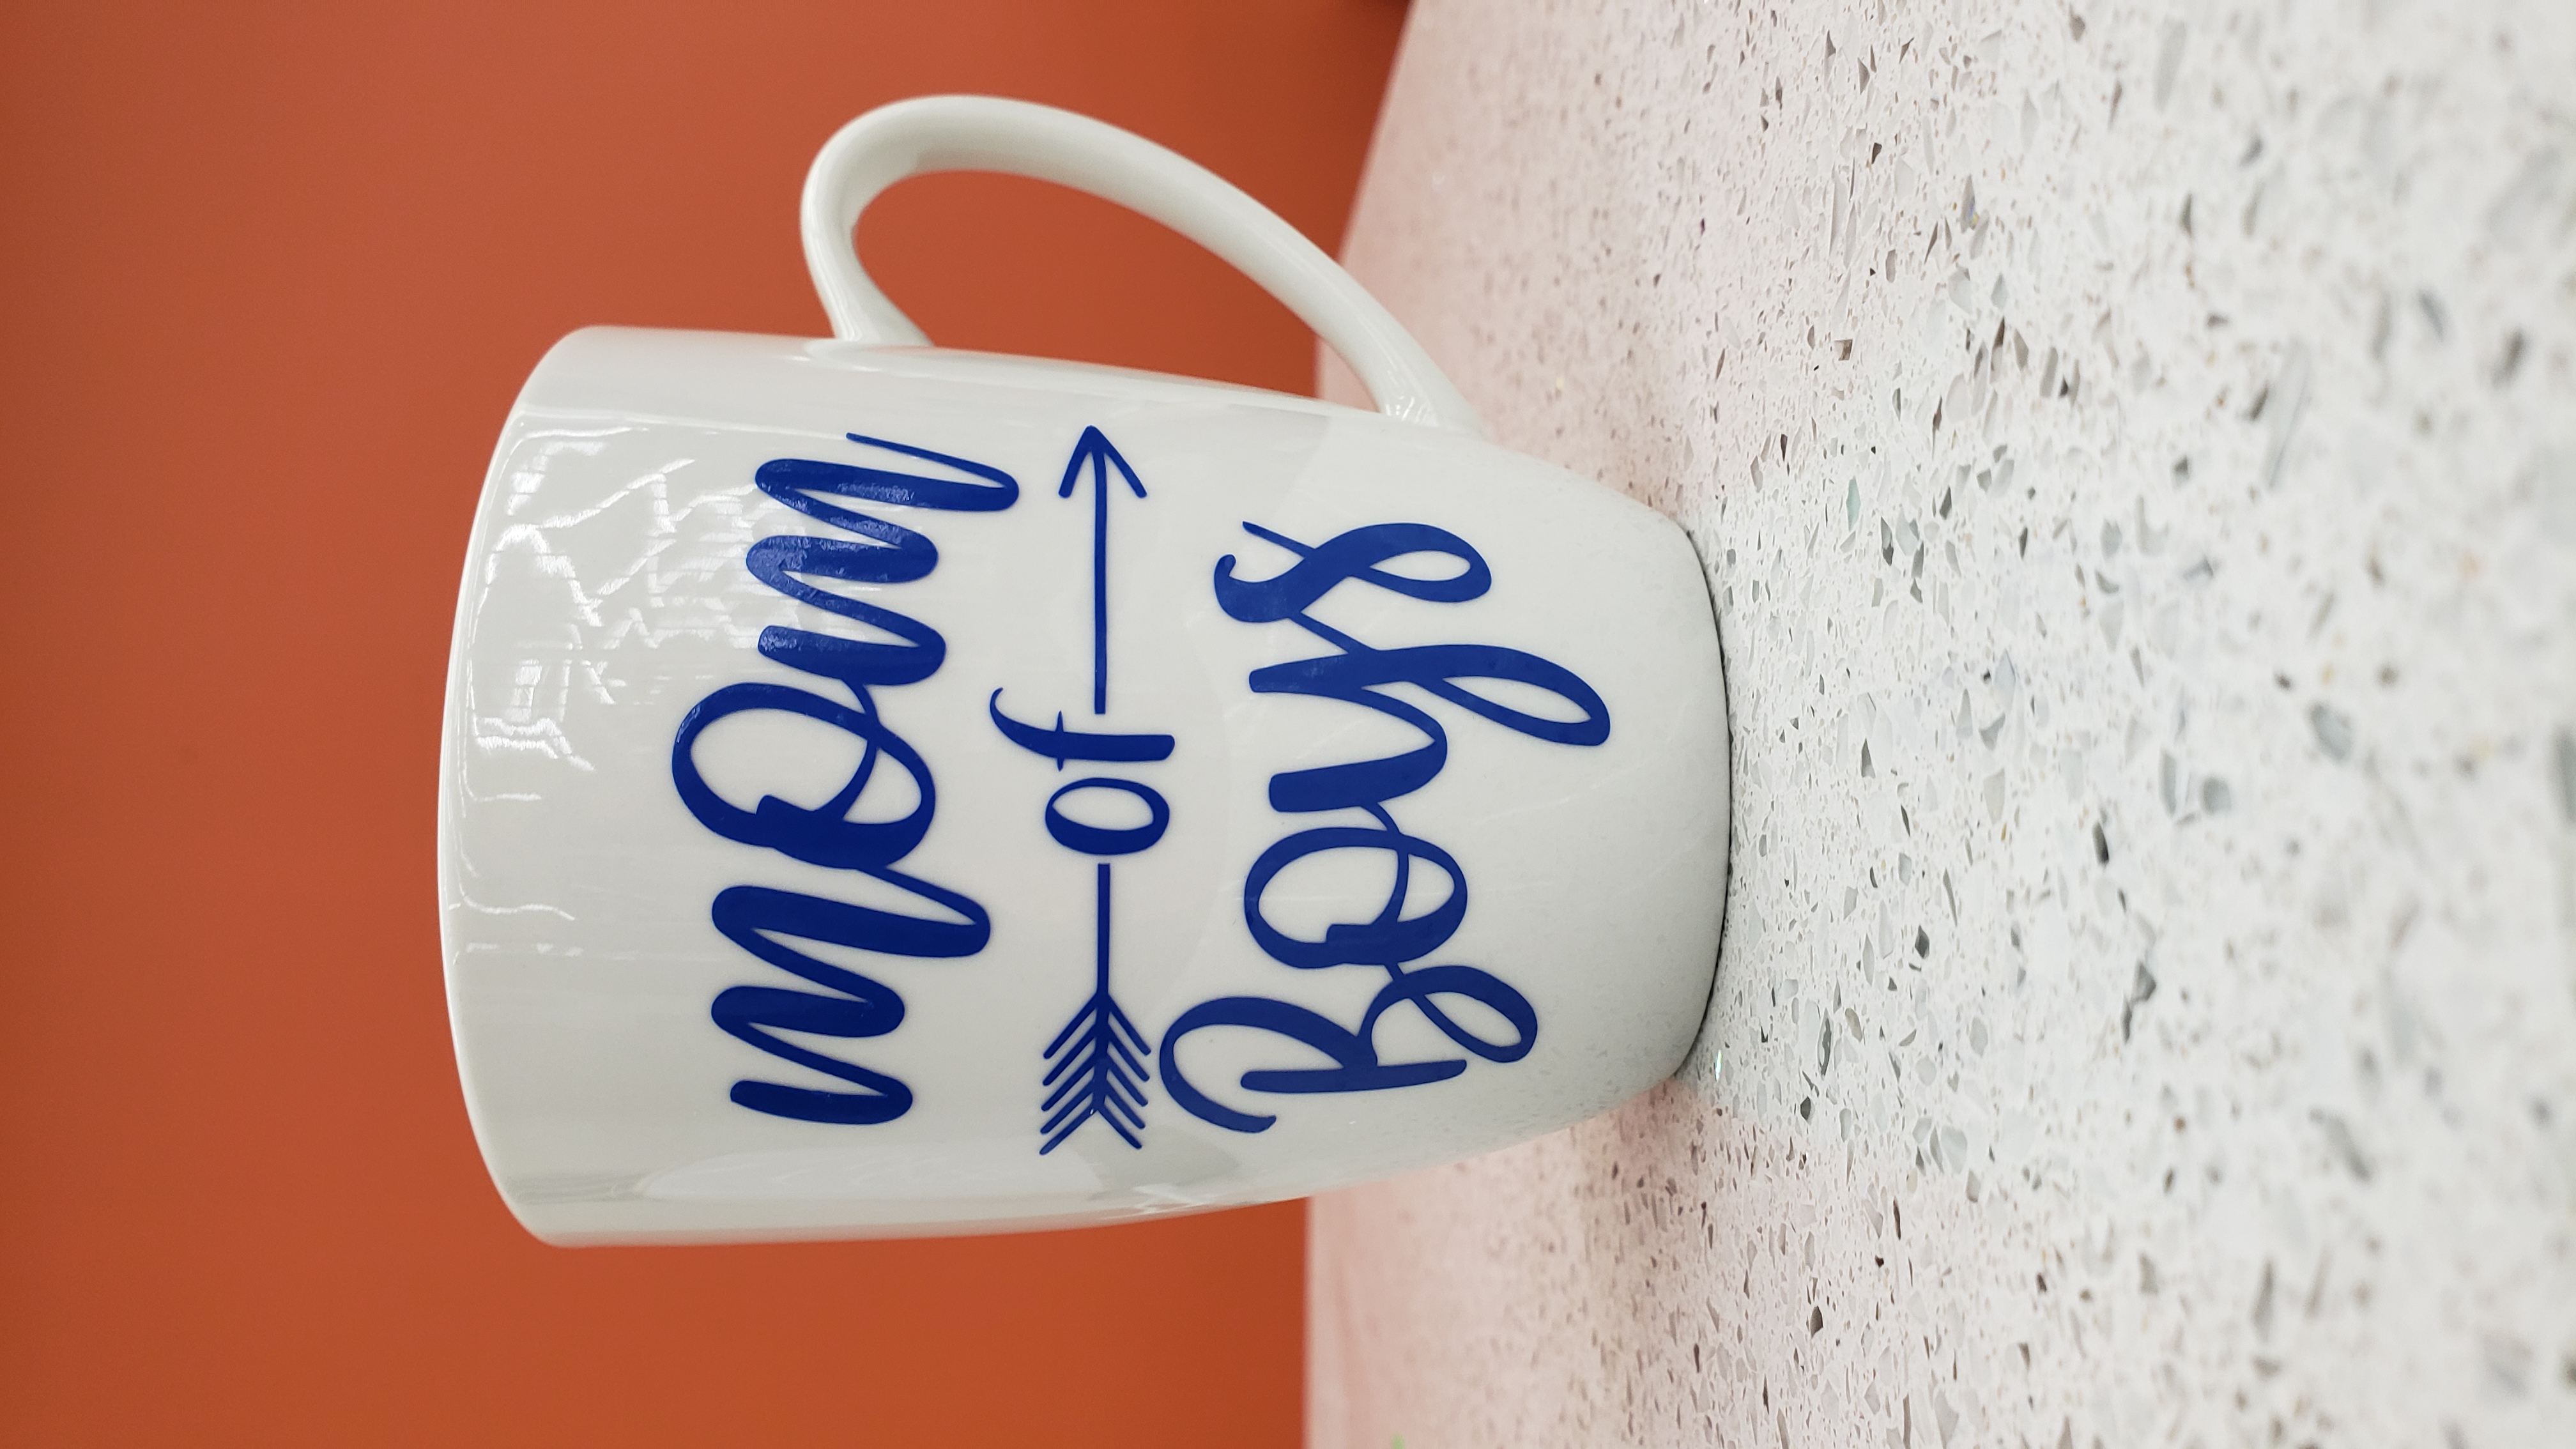 White Mug with blue lettering says "Mom of Boys"